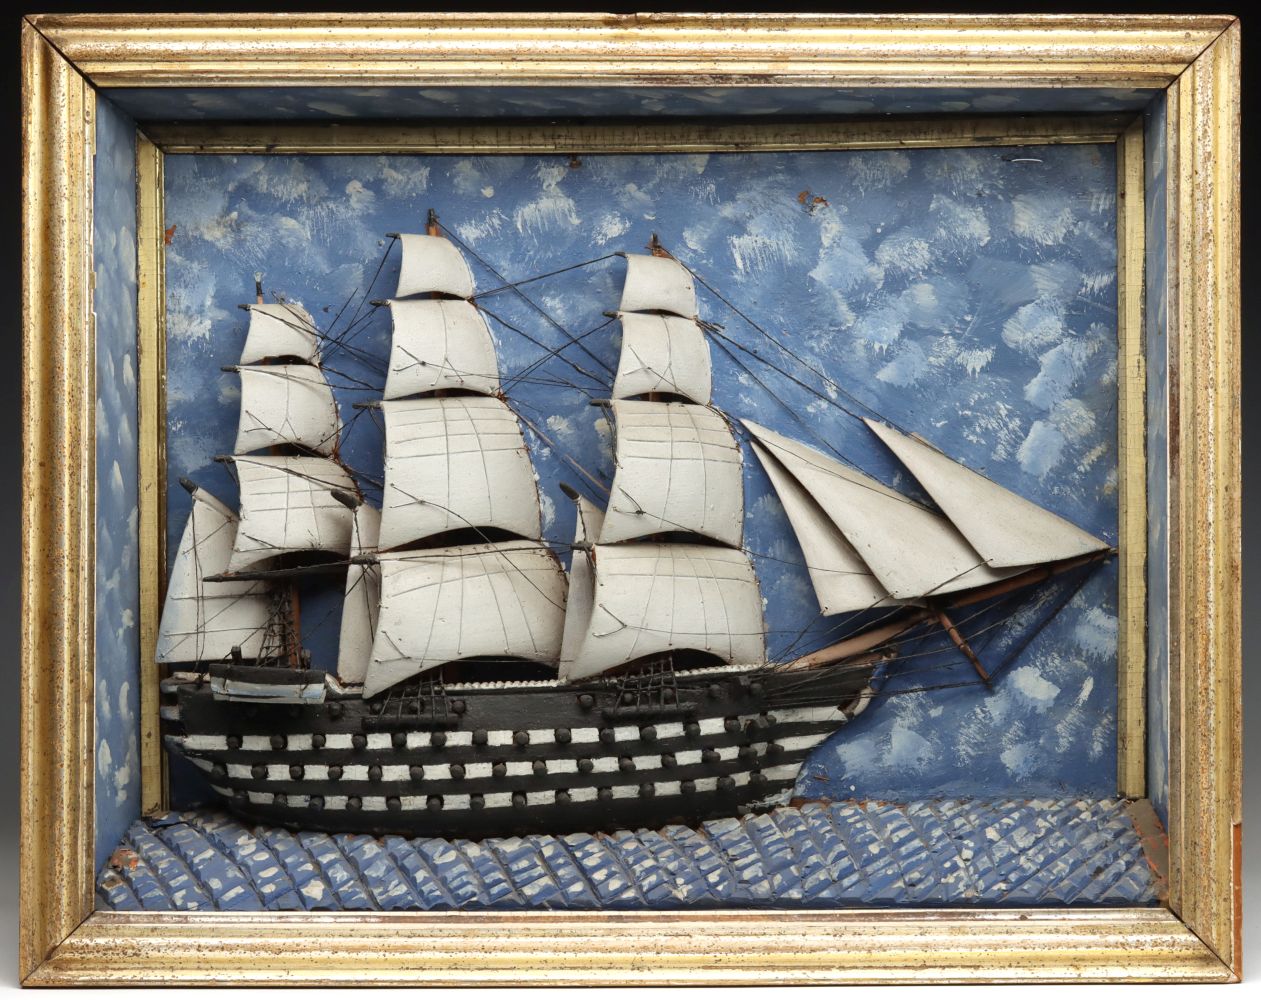 A 19TH C. DIORAMA WITH ARMED SHIP HAVING 54 CANNONS